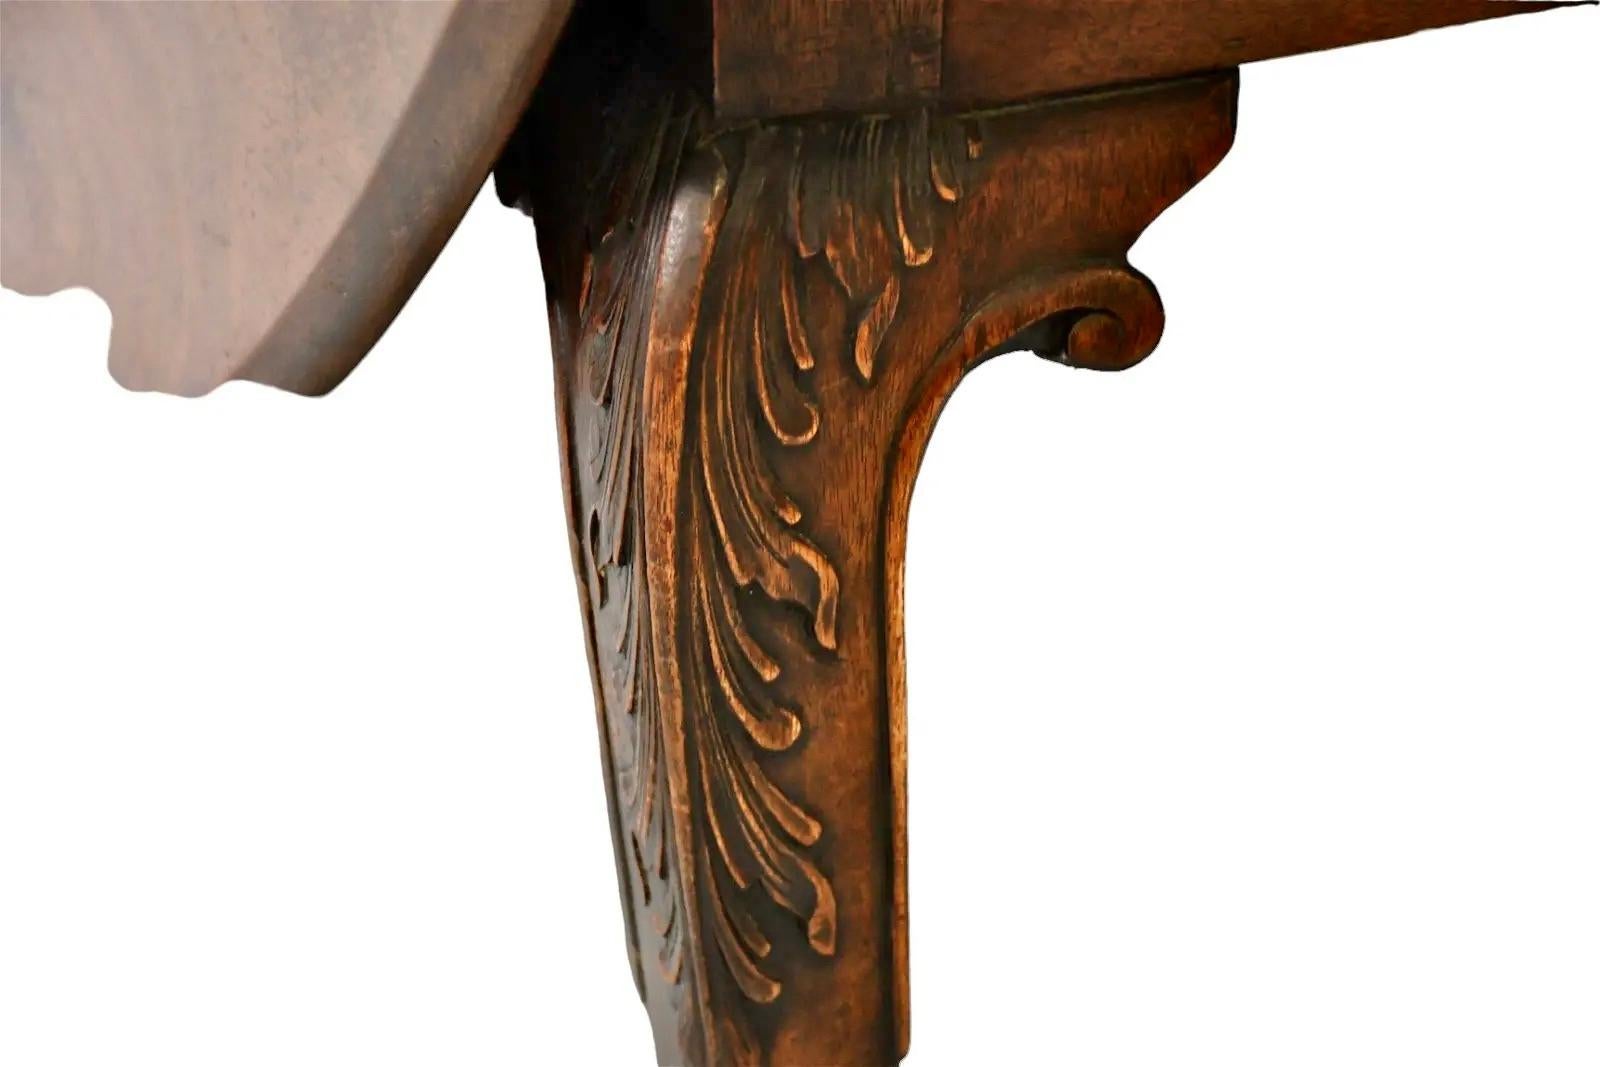 Carved 18th Century Irish Mahogany Wake or Dropleaf Dining Table For Sale